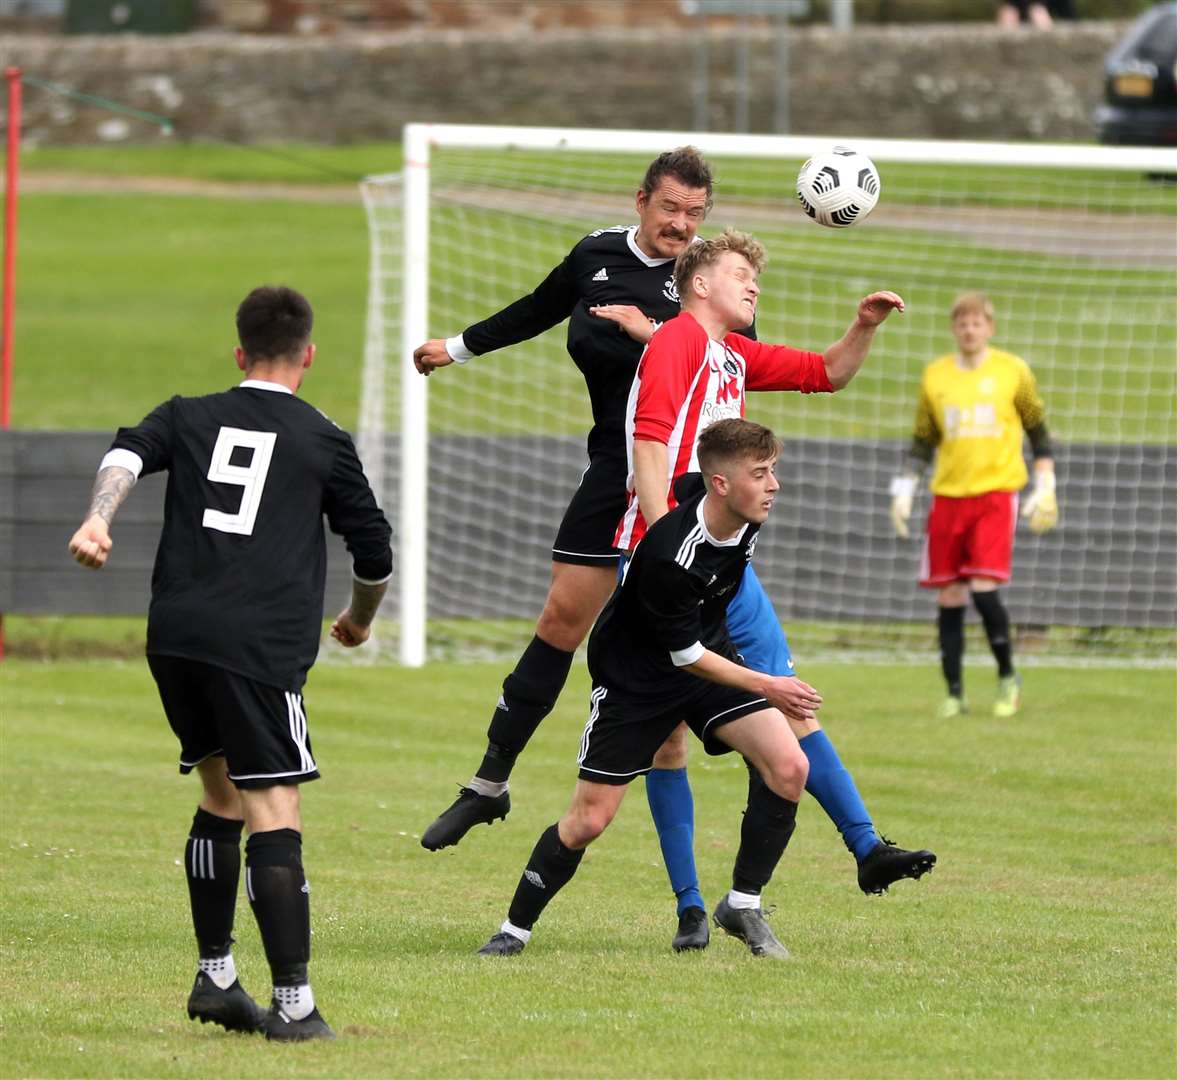 Thurso defender James McLean wins a header against Jamie Skinner of St Duthus during Saturday's draw at the Dammies. Picture: James Gunn